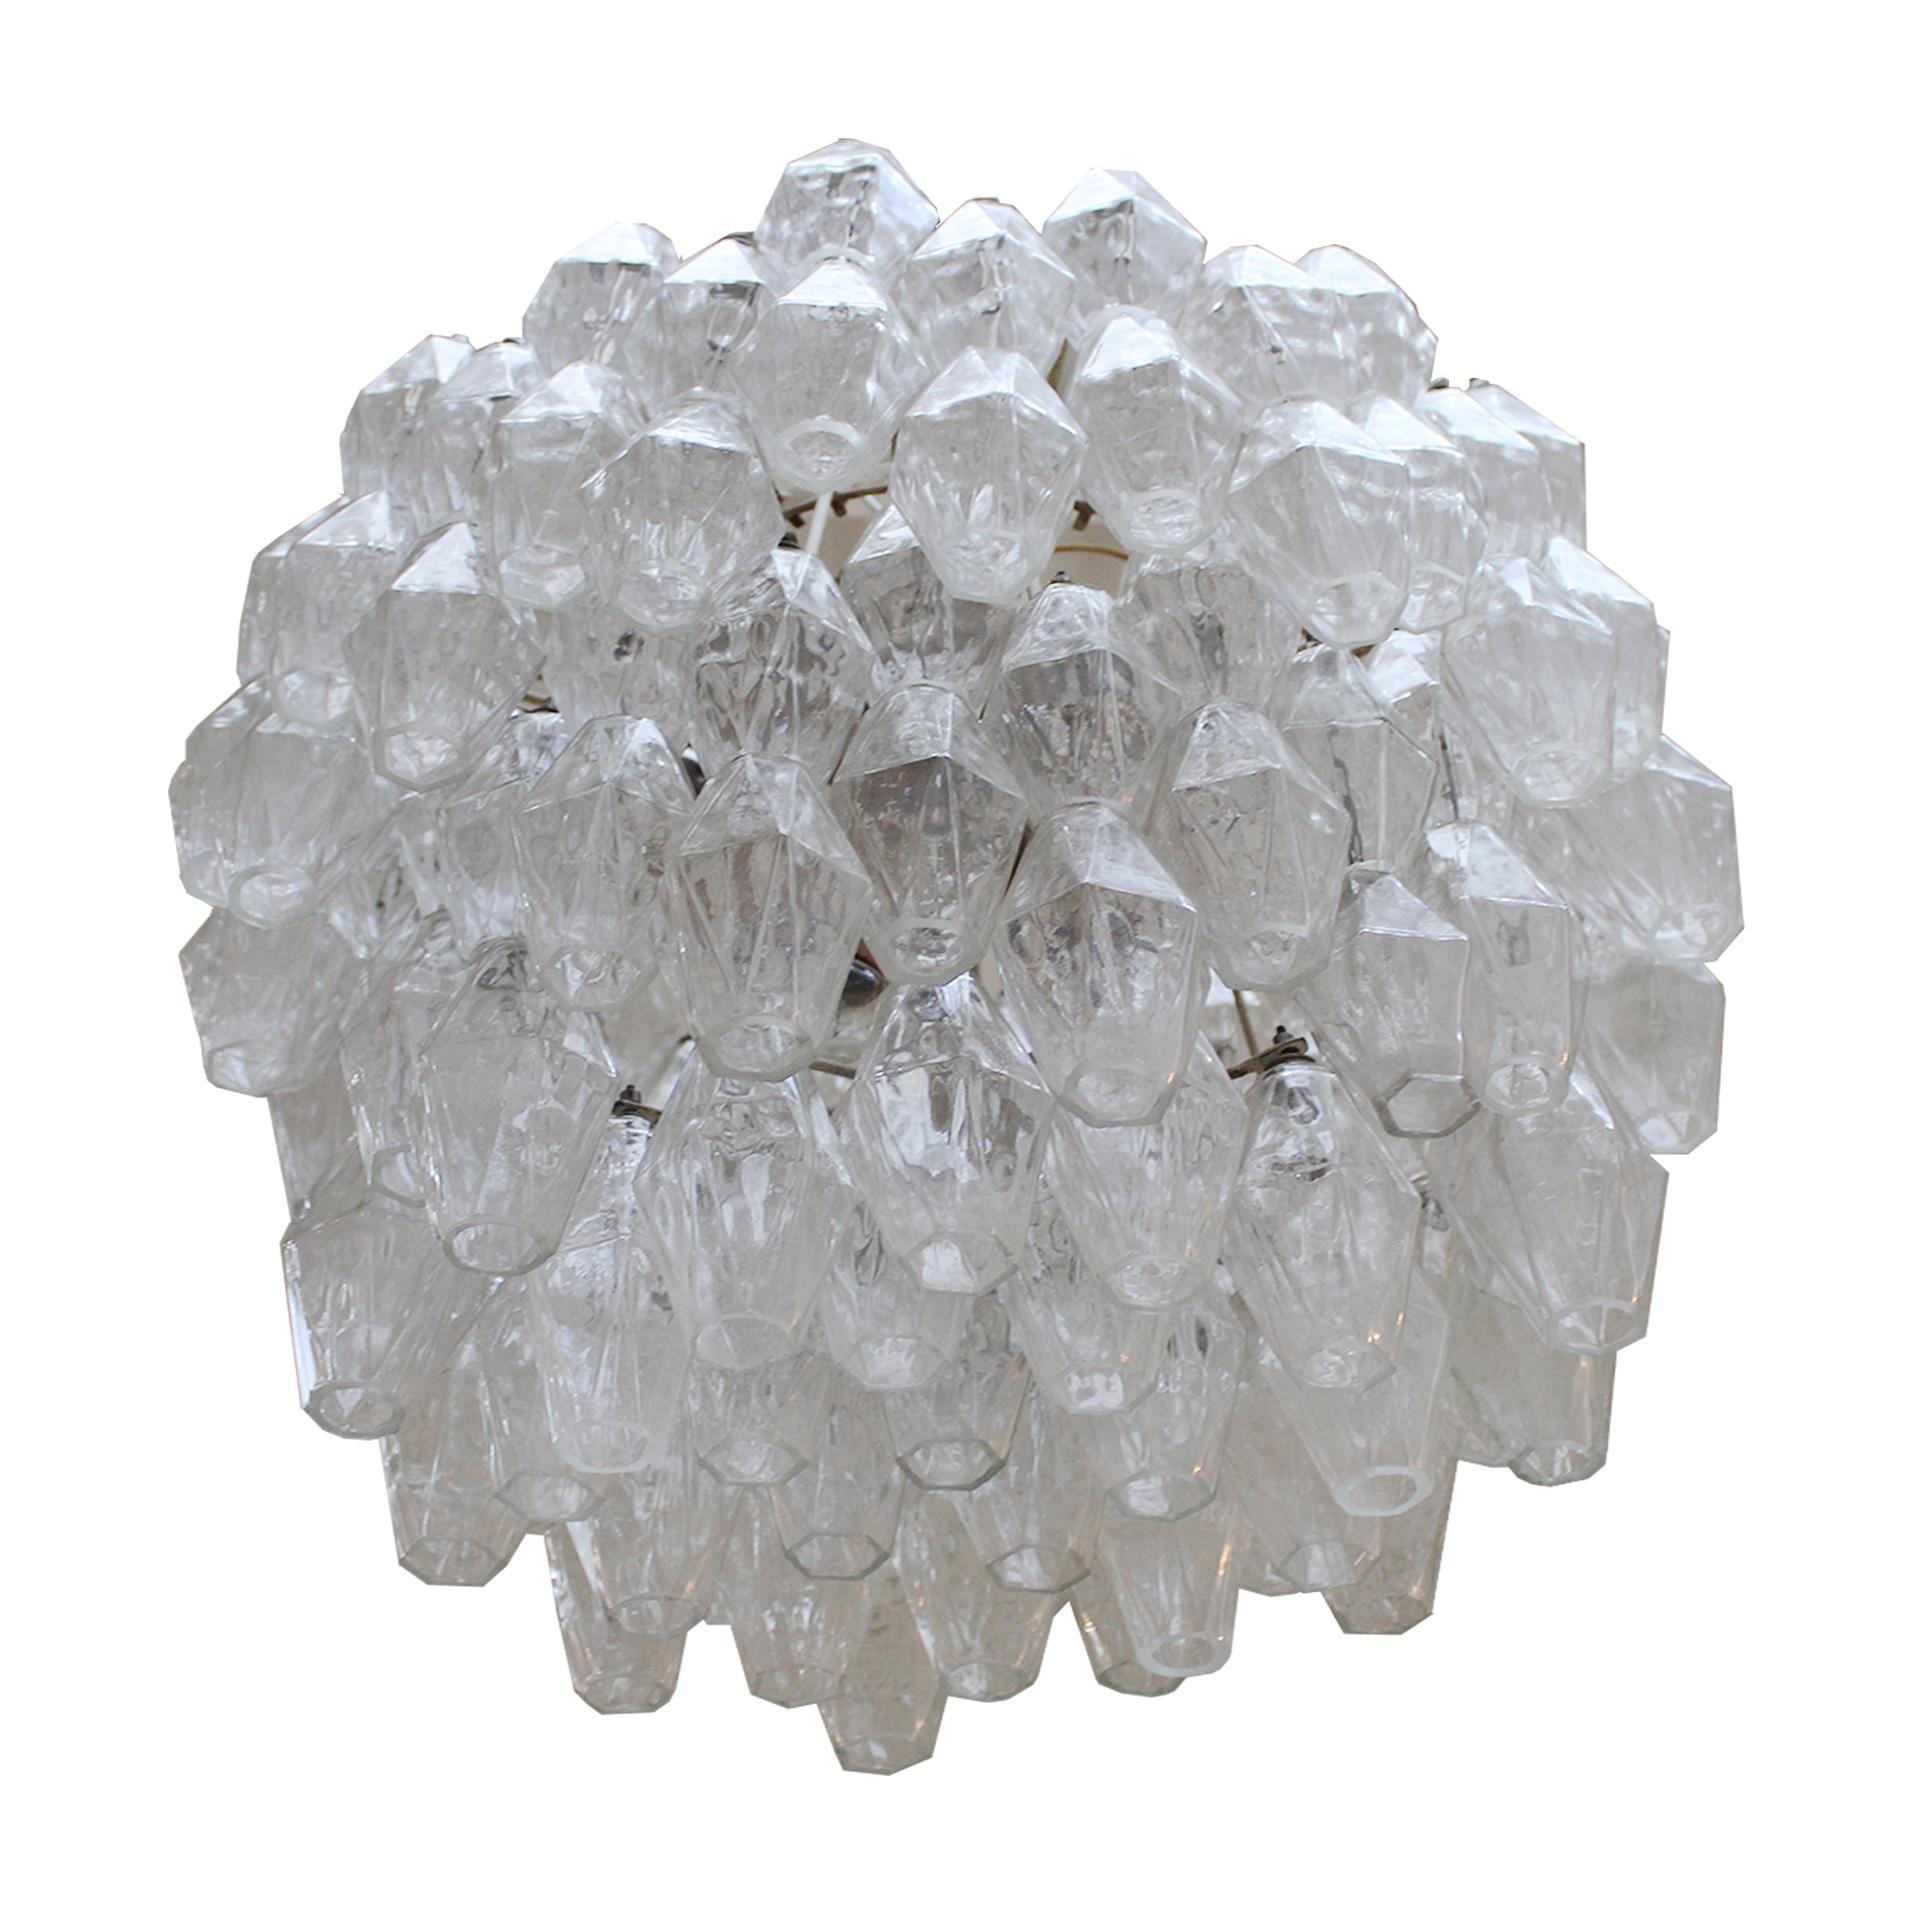 Suspension lamp model “Poliedri” designed by Carlo Scarpa, edited by Venini. Composed by Murano crystal pieces over a structure made in white lacquer metal. Italy 1950.

Excellent vintage condition, minor wear consistent with age and use.

Our